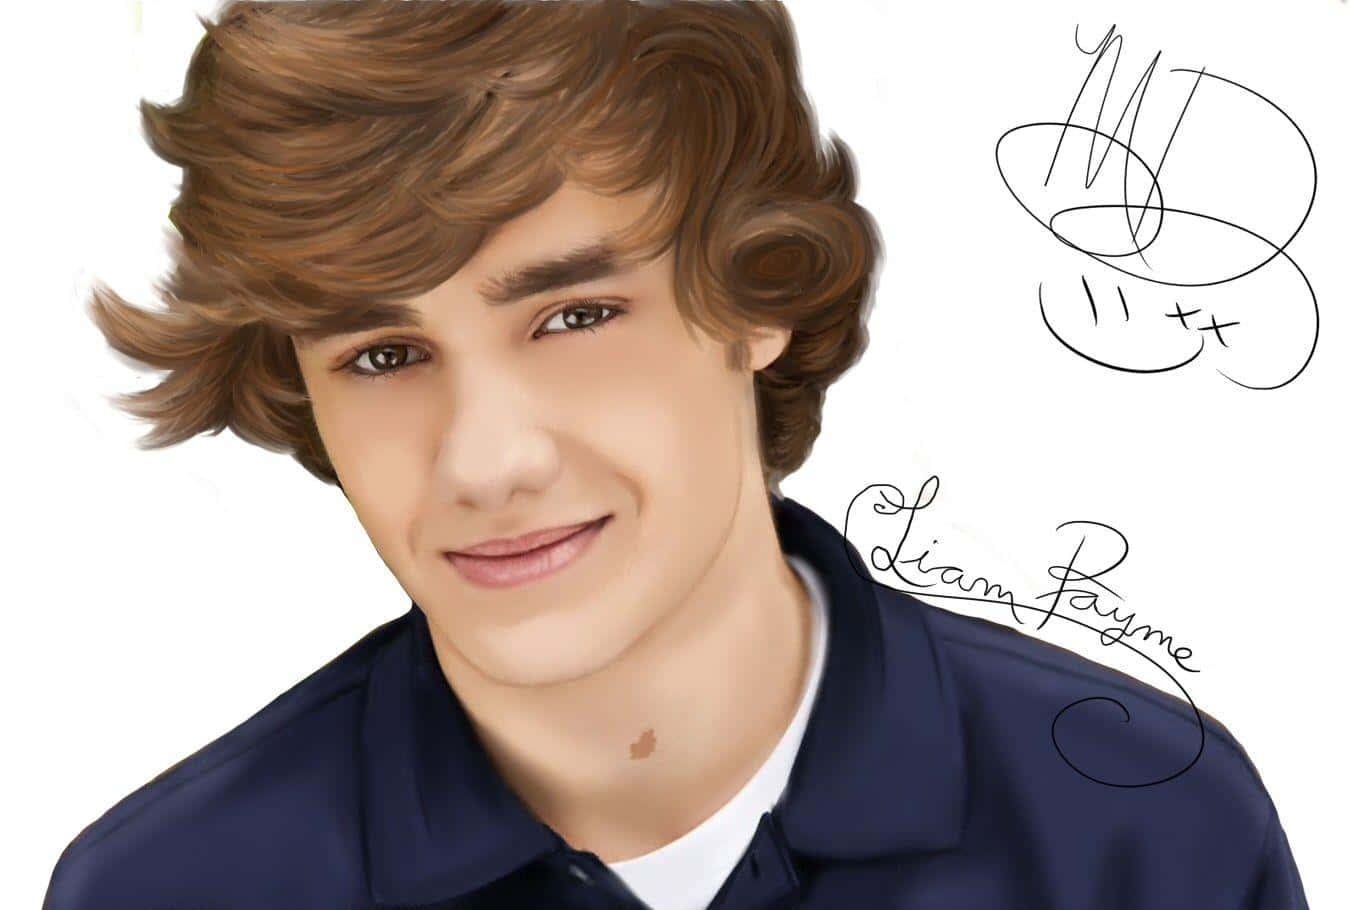 Heather Rooney Art  Colored pencil drawing of Liam Payne